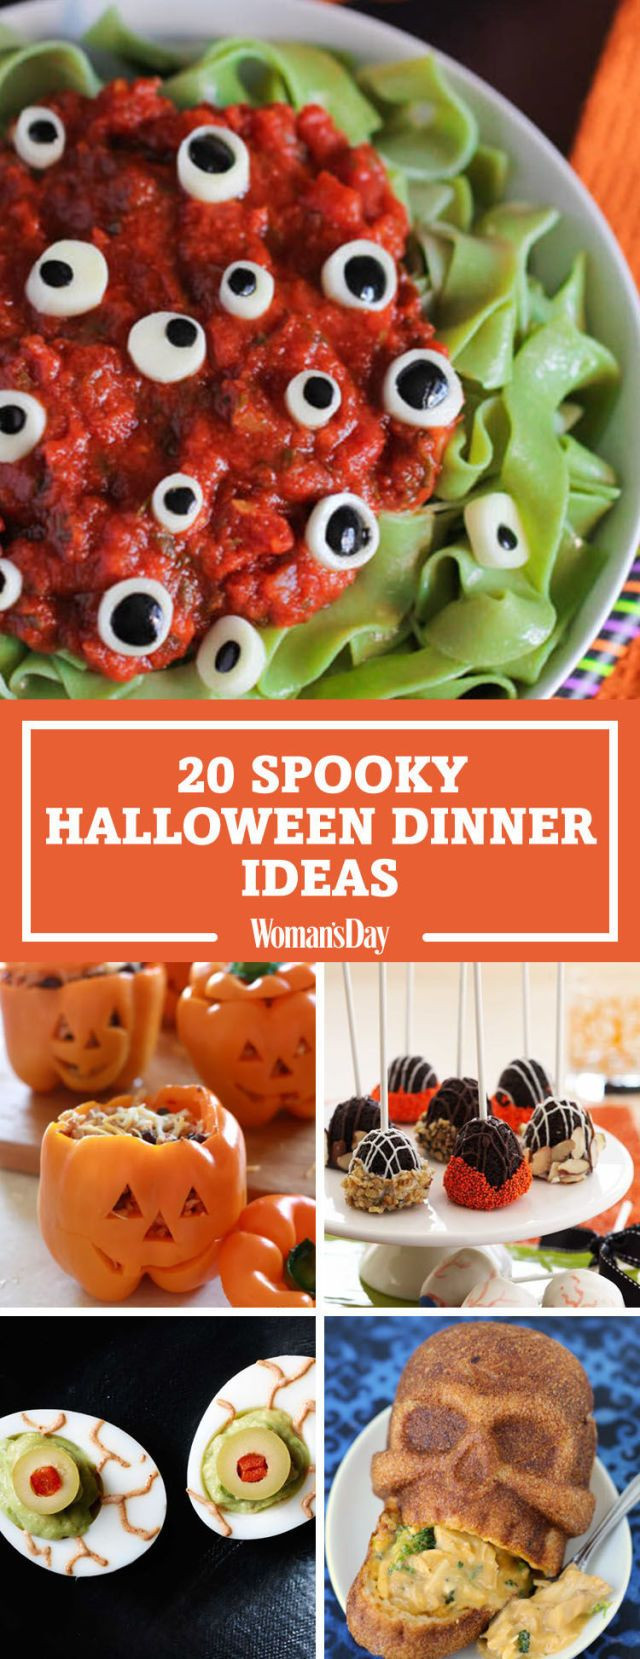 Halloween Party Food Ideas For Adults
 40 Halloween Dinner Ideas That Are So Good It s Scary